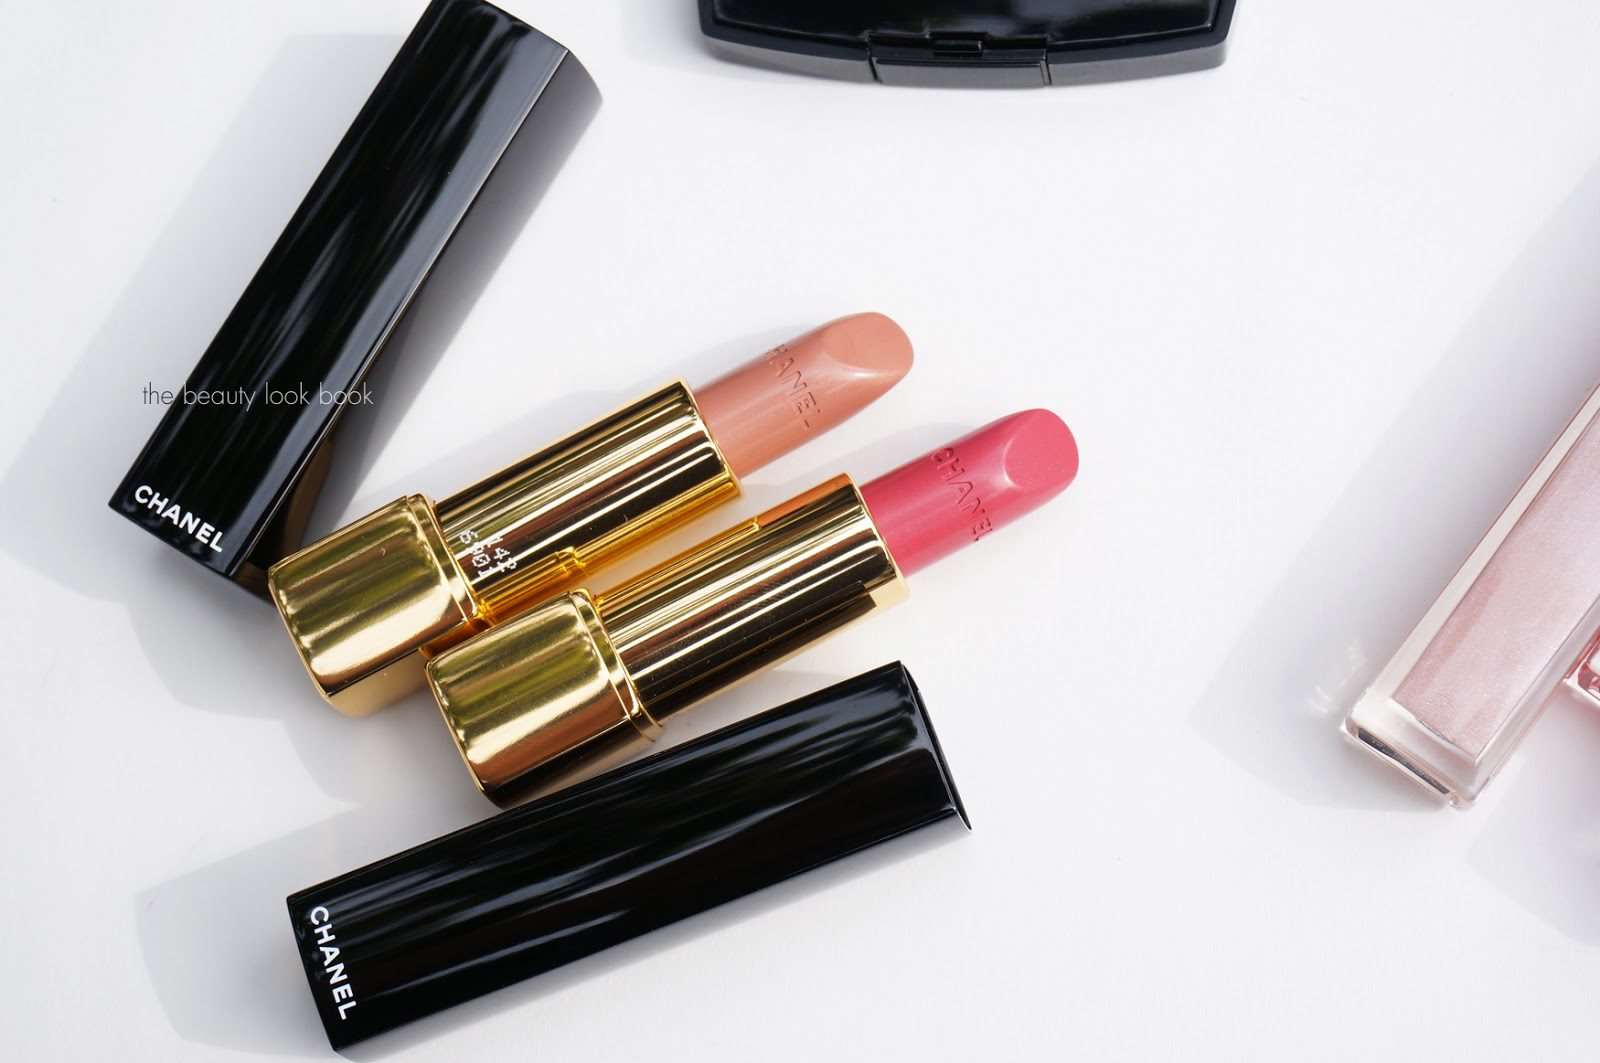 Chanel Charmeuse #142 and Fleurie #139 Rouge Allure - Jardin de Camélias  Collection - The Beauty Look Book